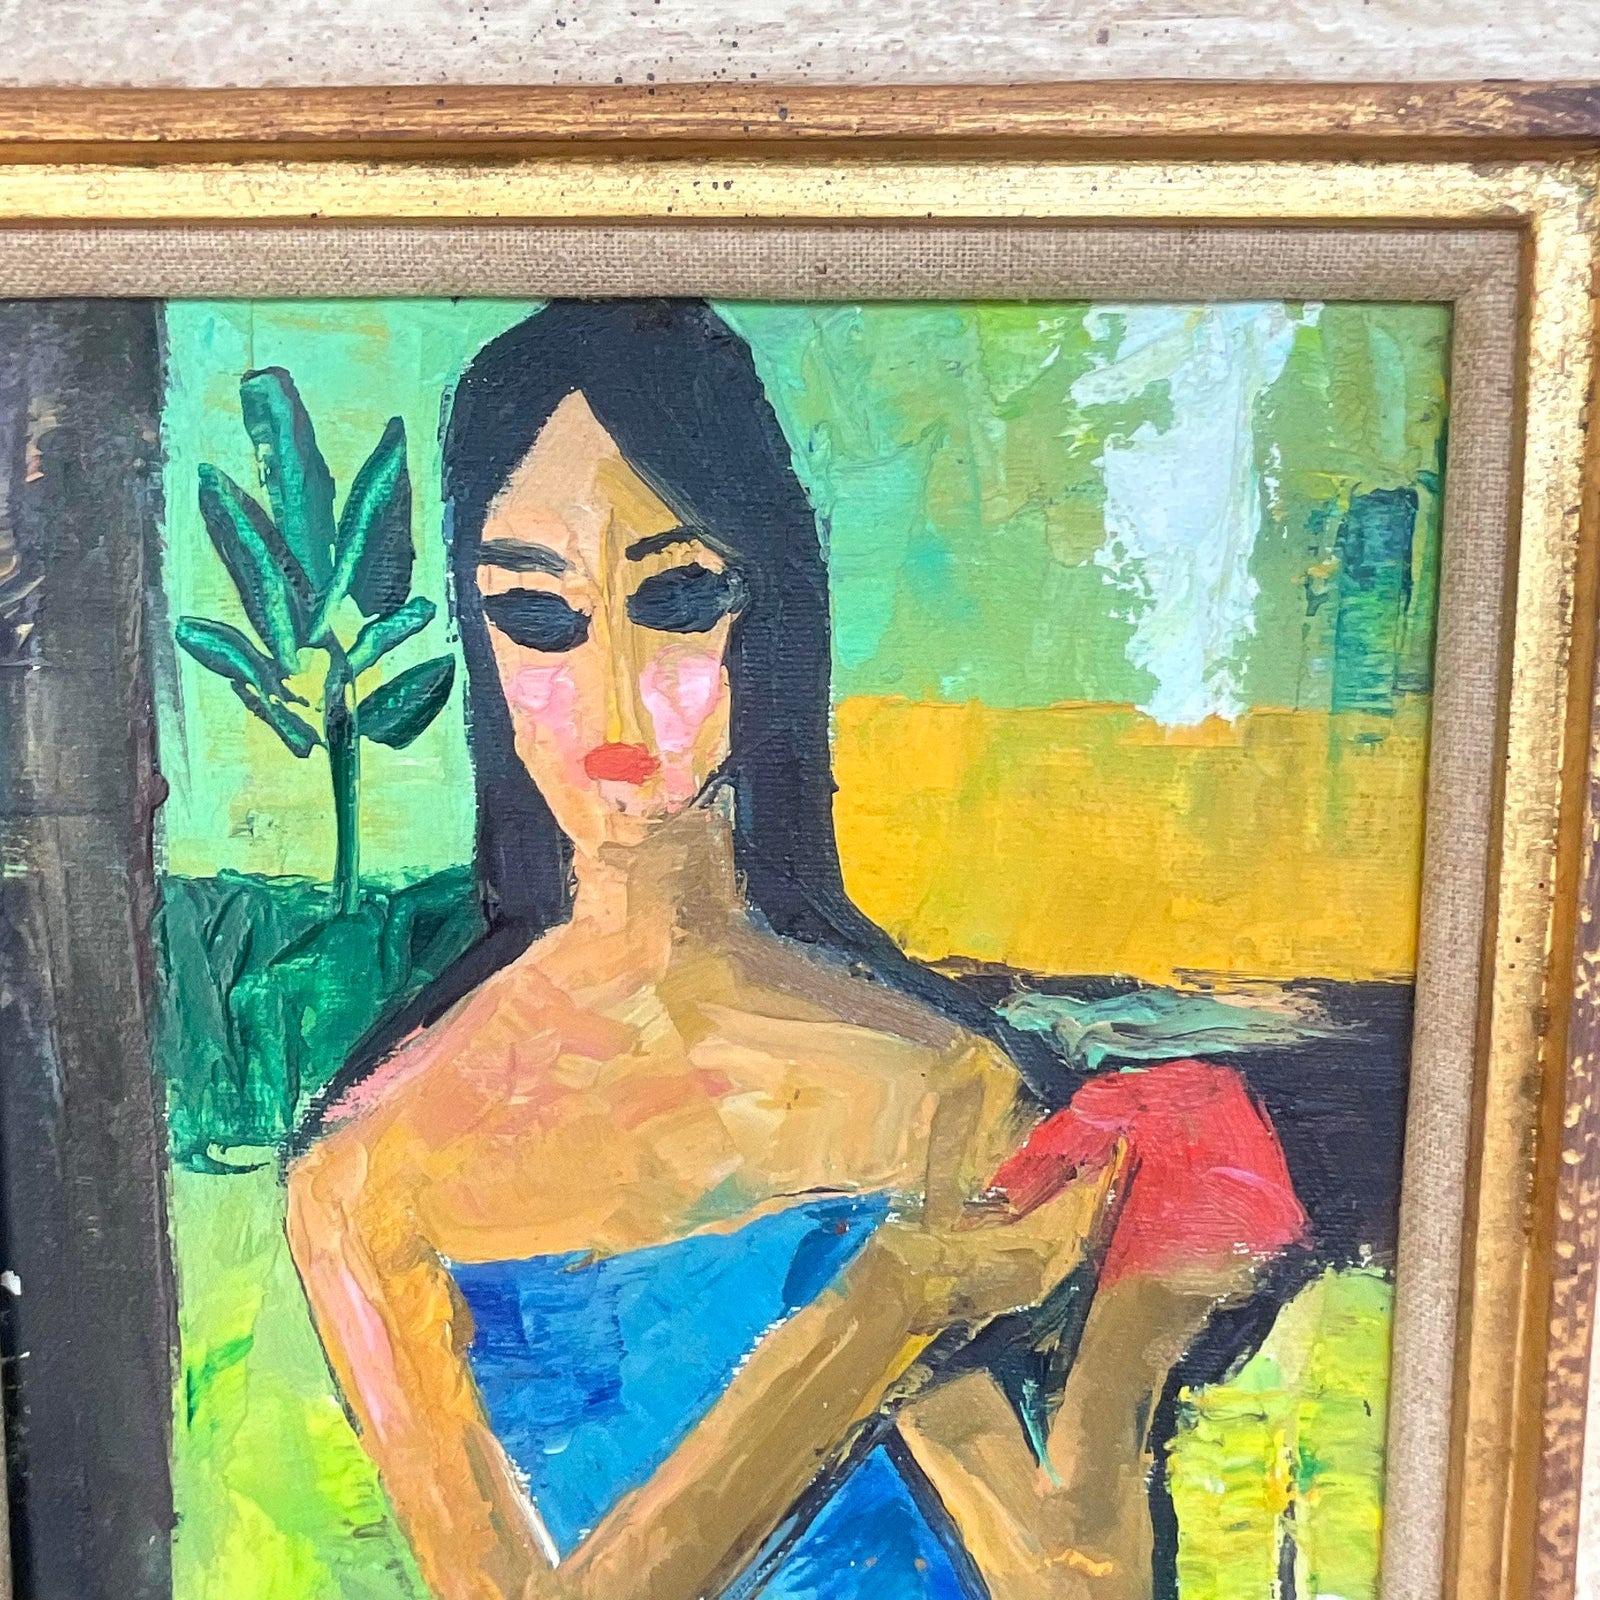 North American Vintage Signed Original Abstract Expressionist Figural Oil Painting For Sale